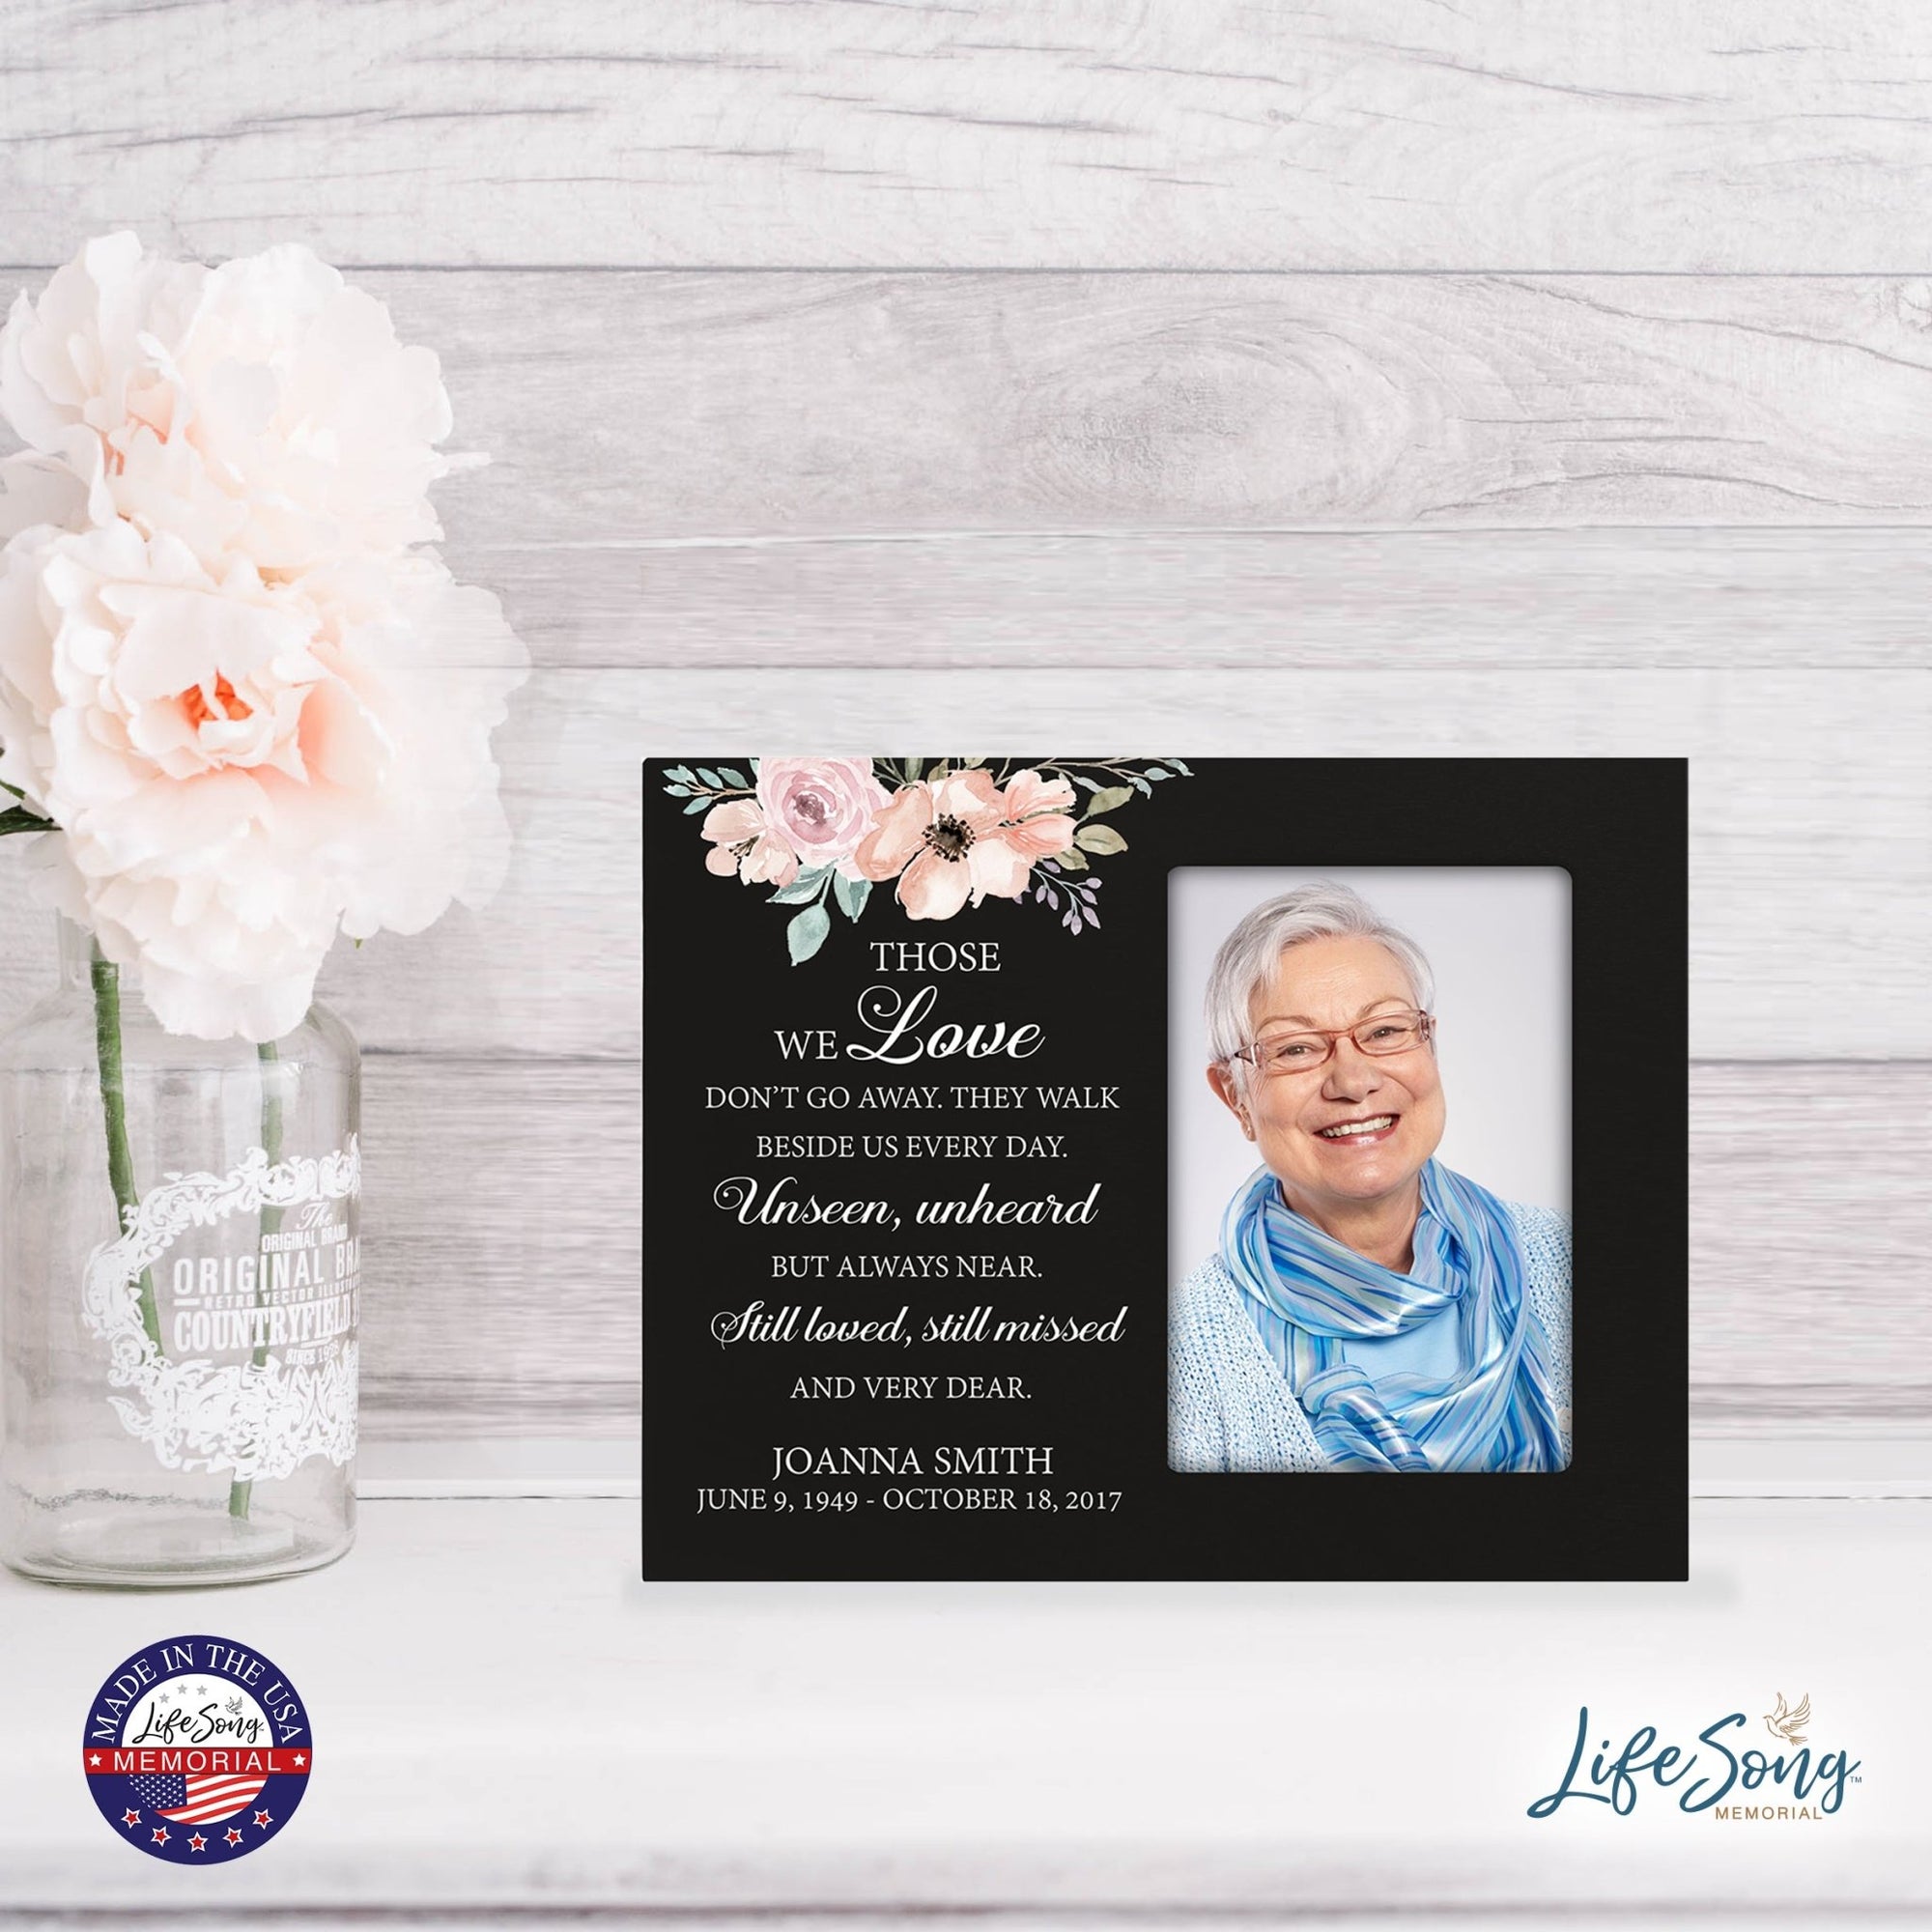 Personalized Horizontal 8x10 Wooden Memorial Picture Frame Holds 4x6 Photo - Those We Love Don’t Go (Thought) - LifeSong Milestones